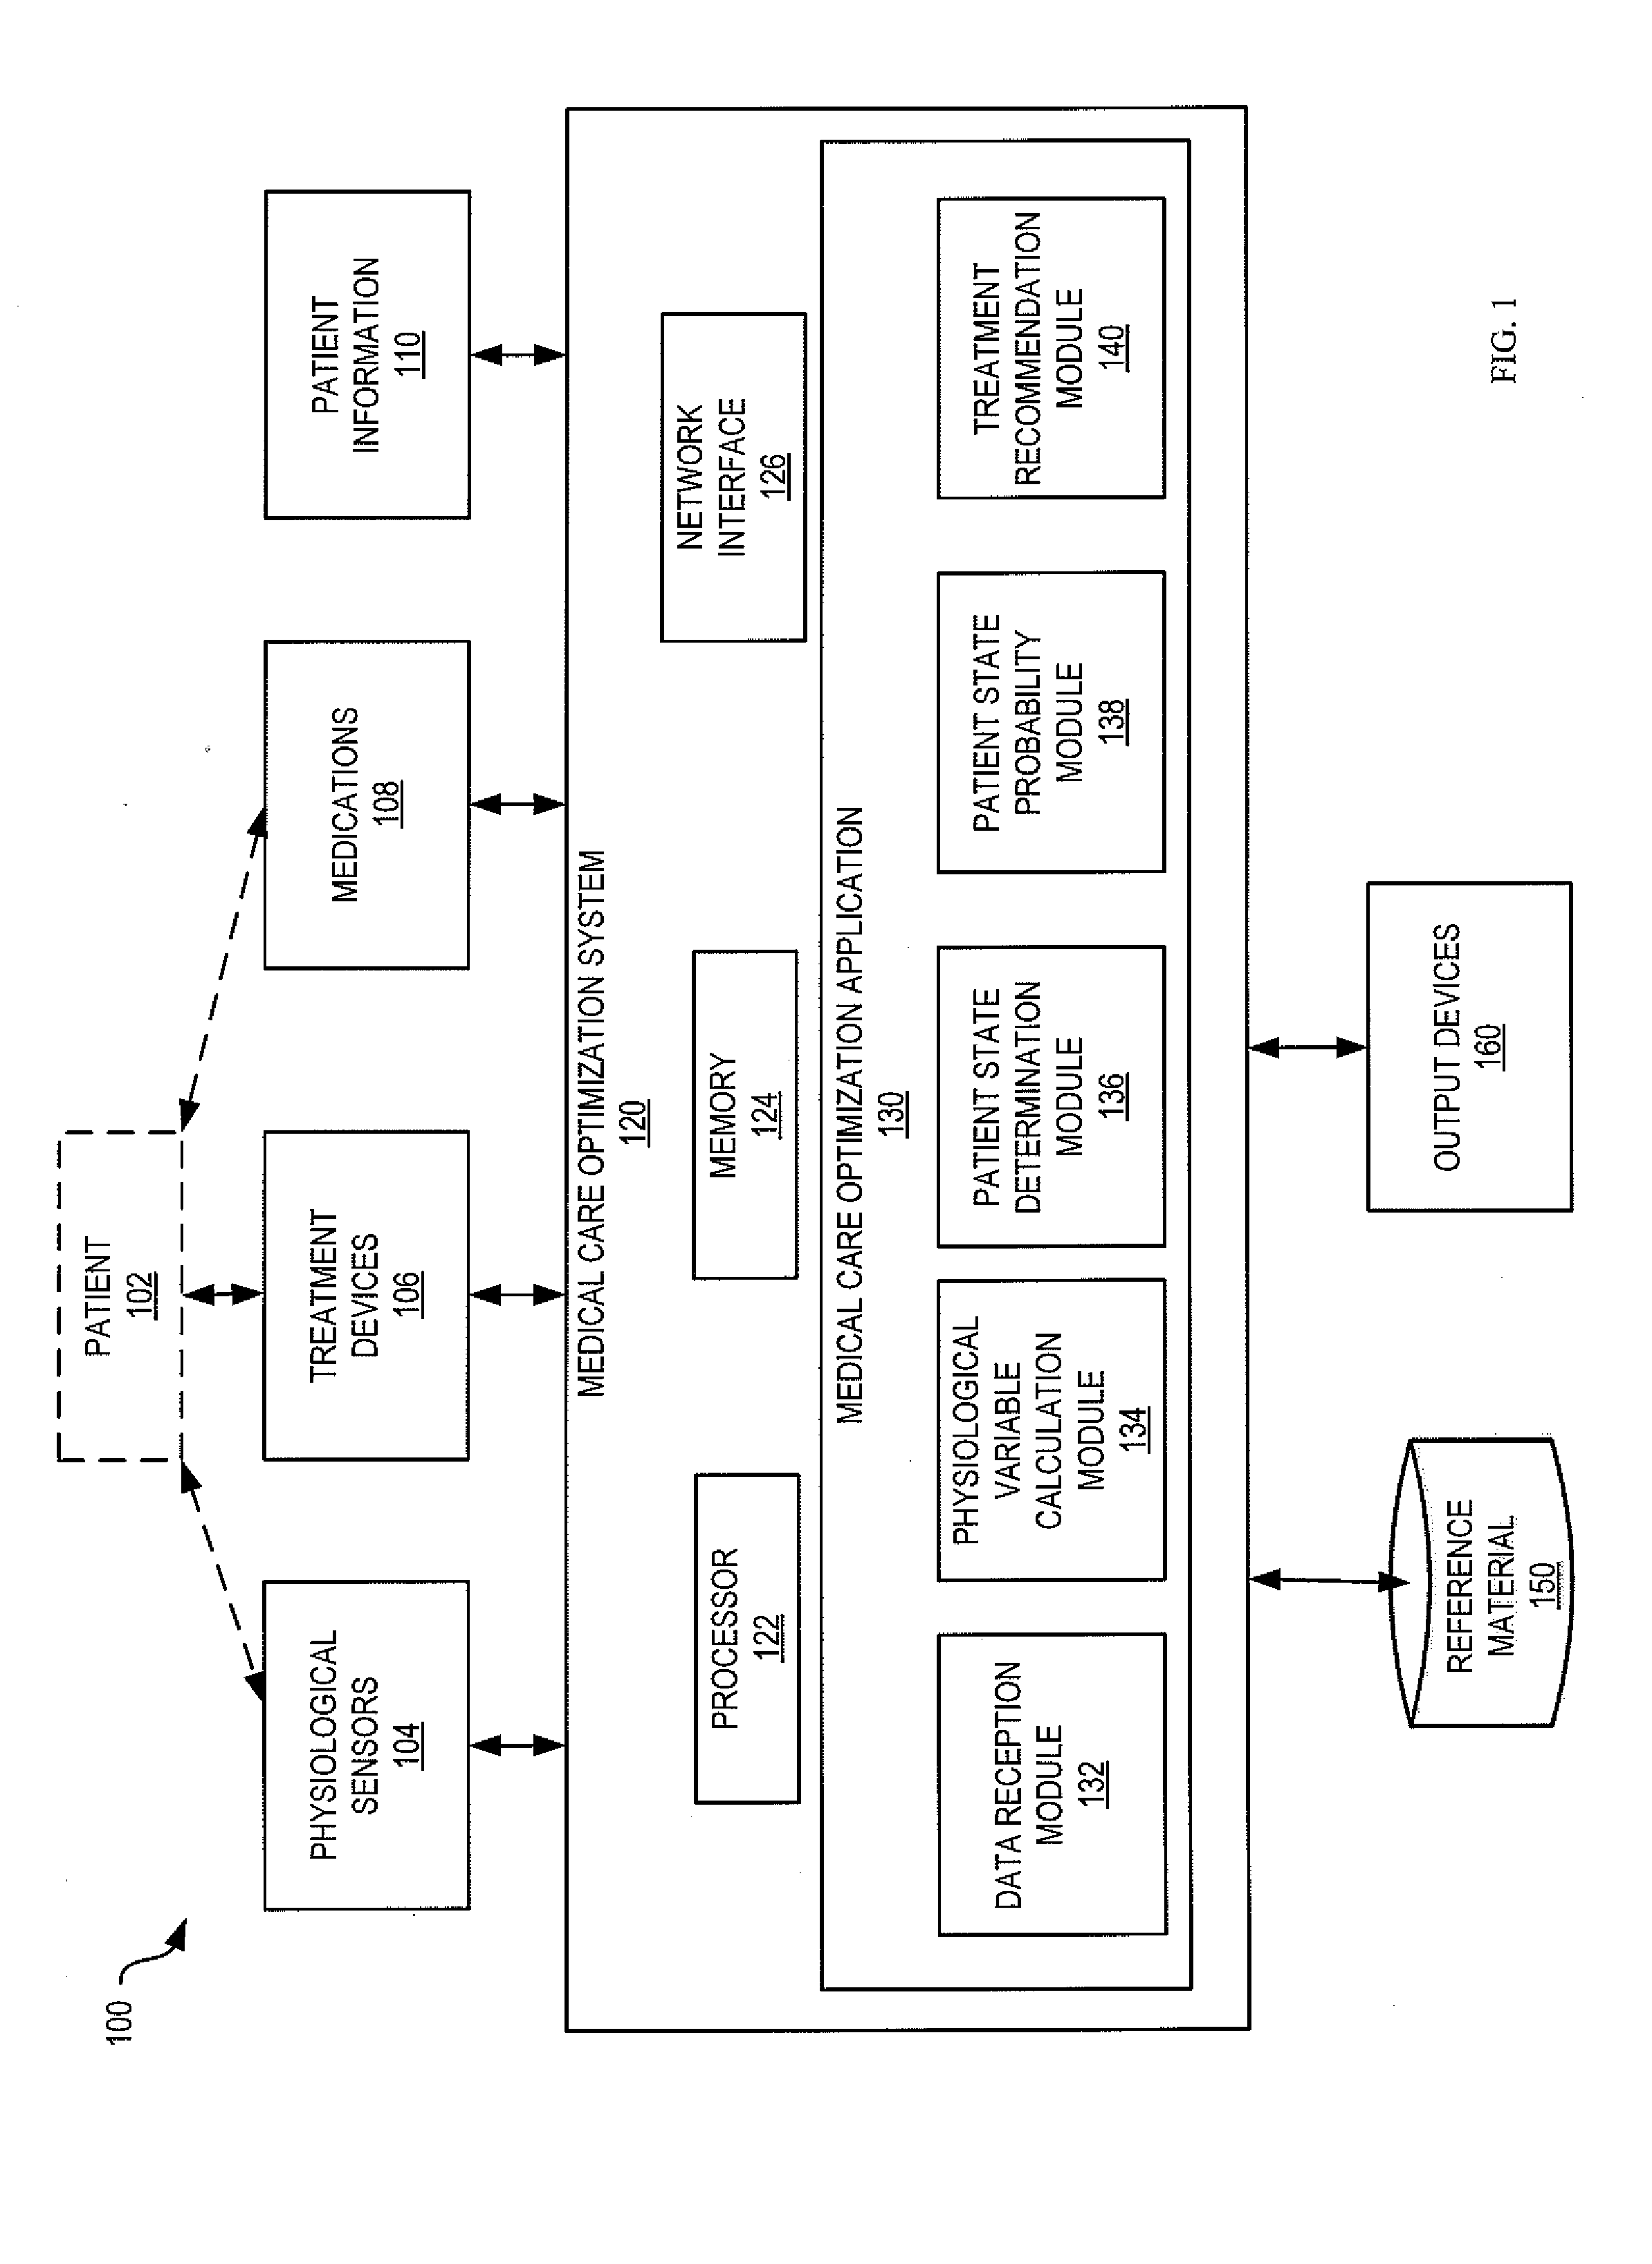 Systems and methods for optimizing medical care through data monitoring and feedback treatment